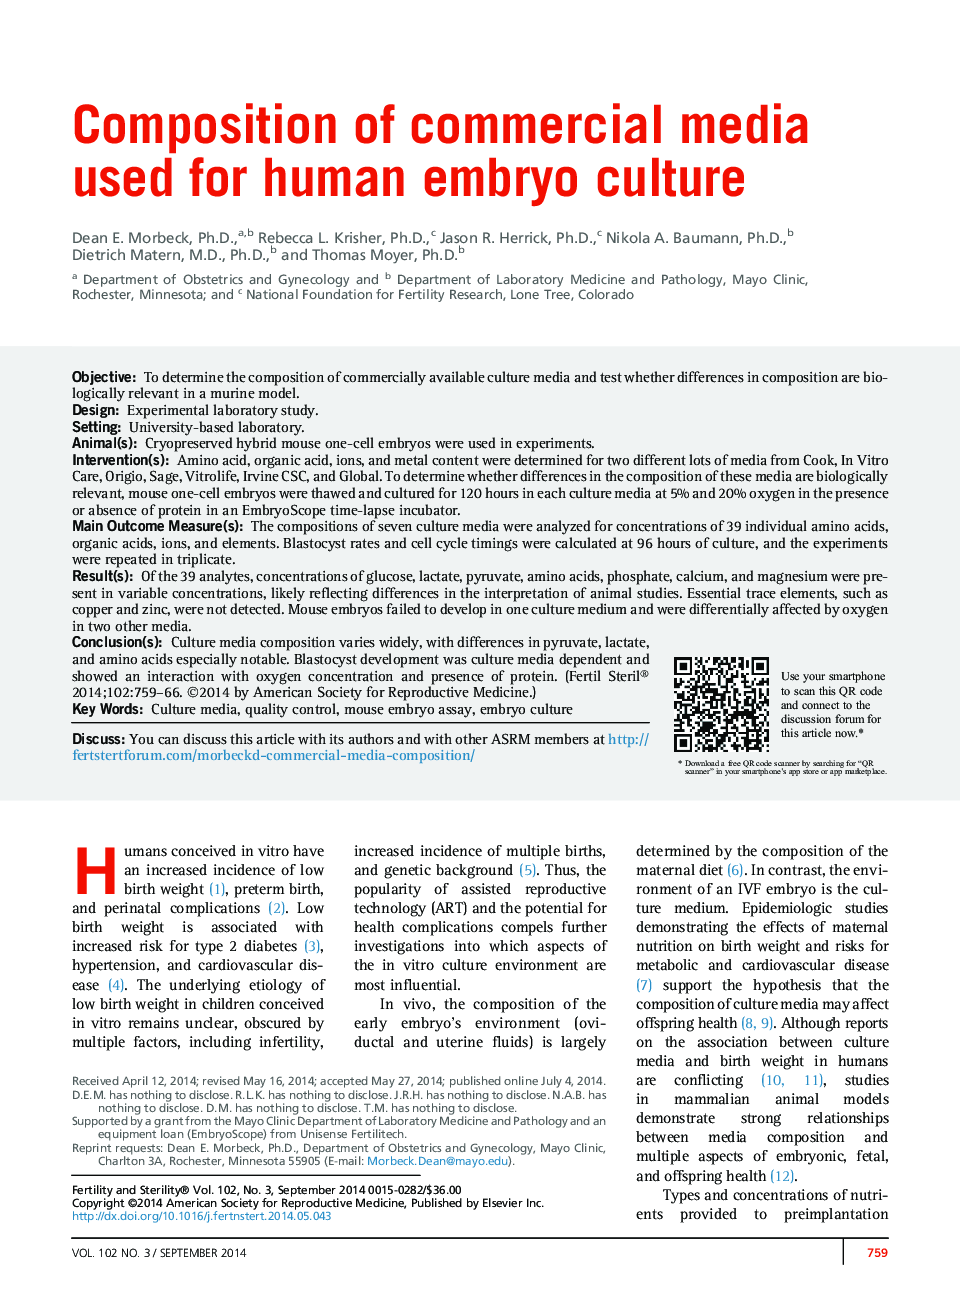 Composition of commercial media used for human embryo culture